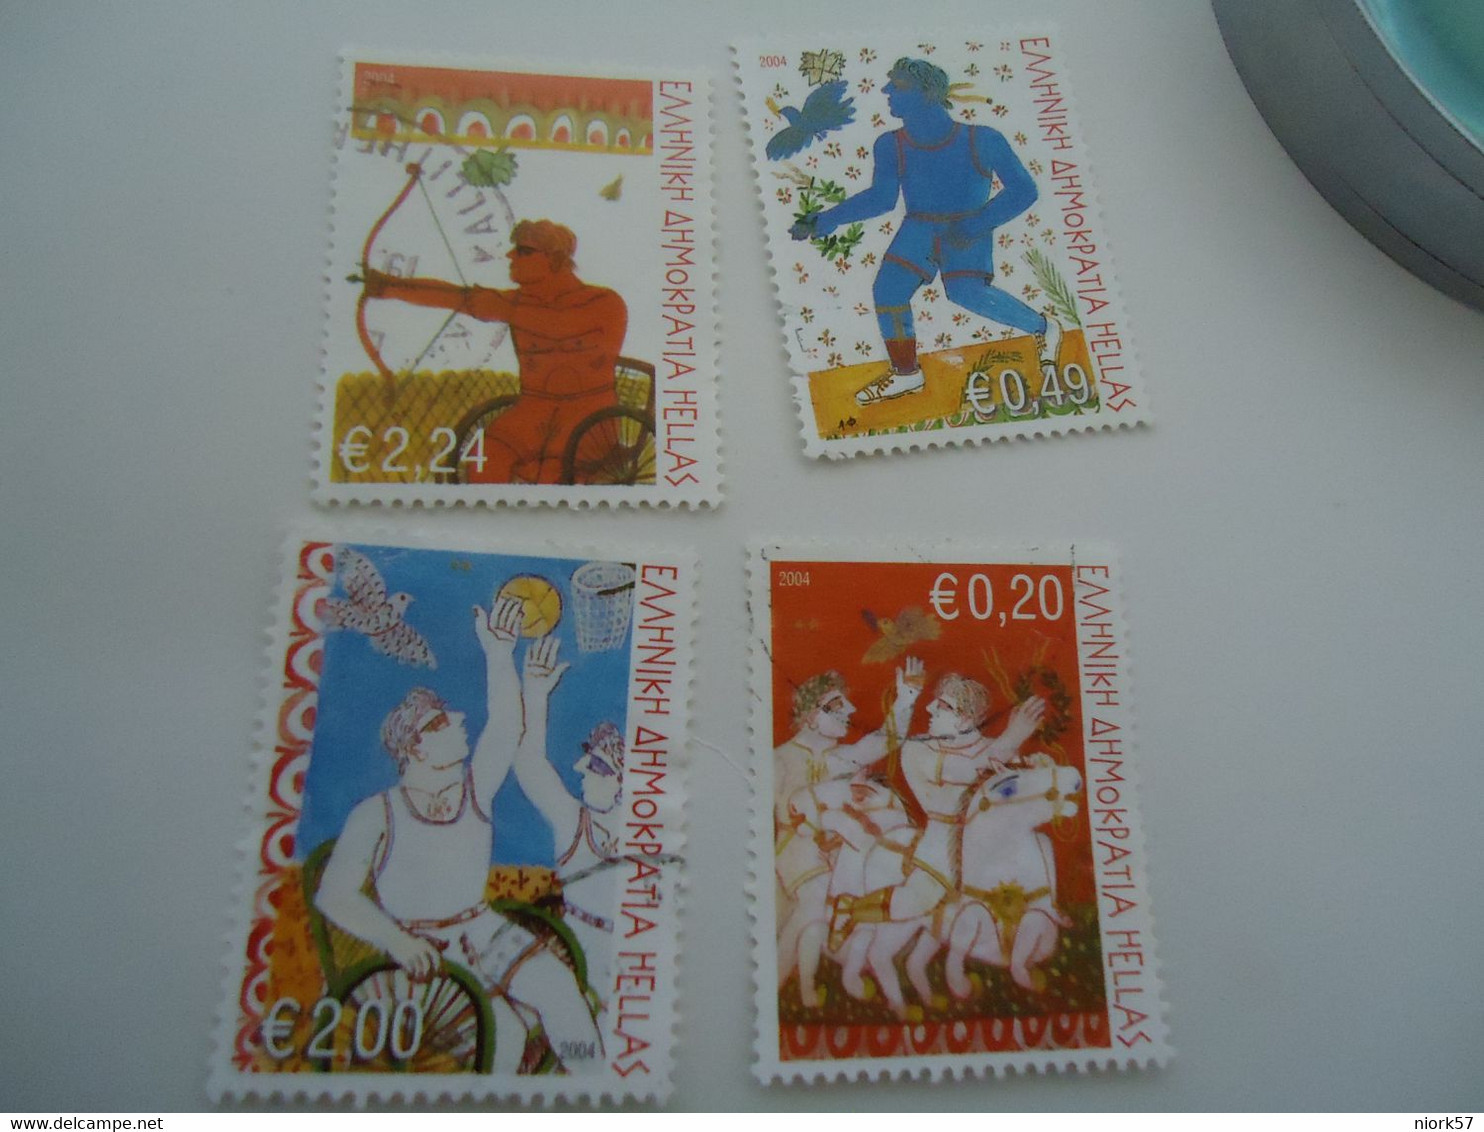 GREECE USED STAMPS SET 4 OLYMPIG GAMES ATHENS 2004 POWER OF WILL - Eté 2004: Athènes - Paralympic